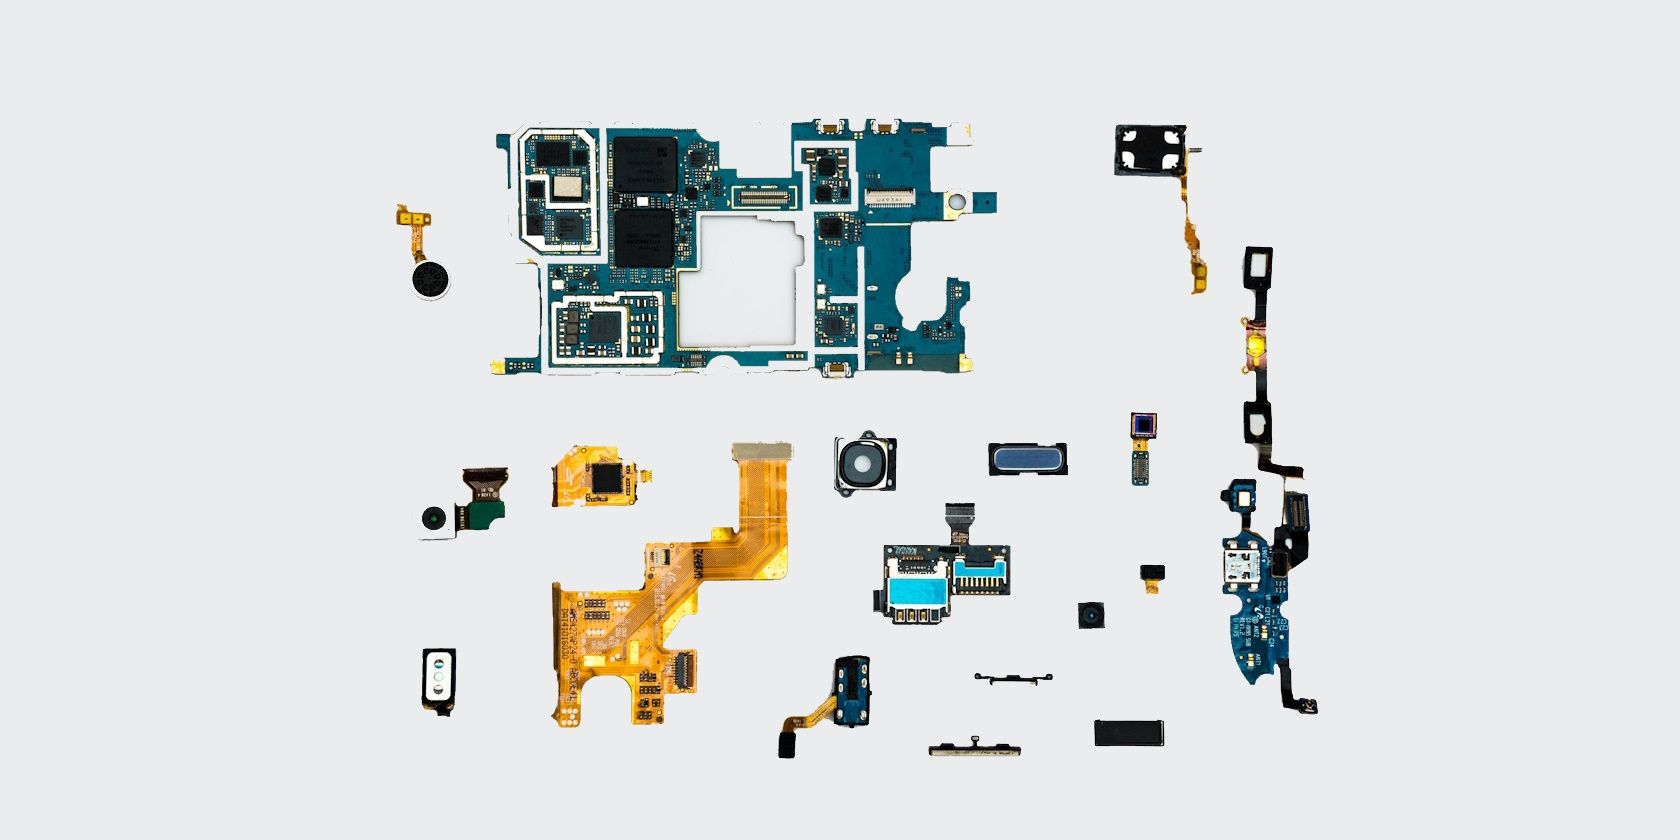 Example of a disassembled smartphone